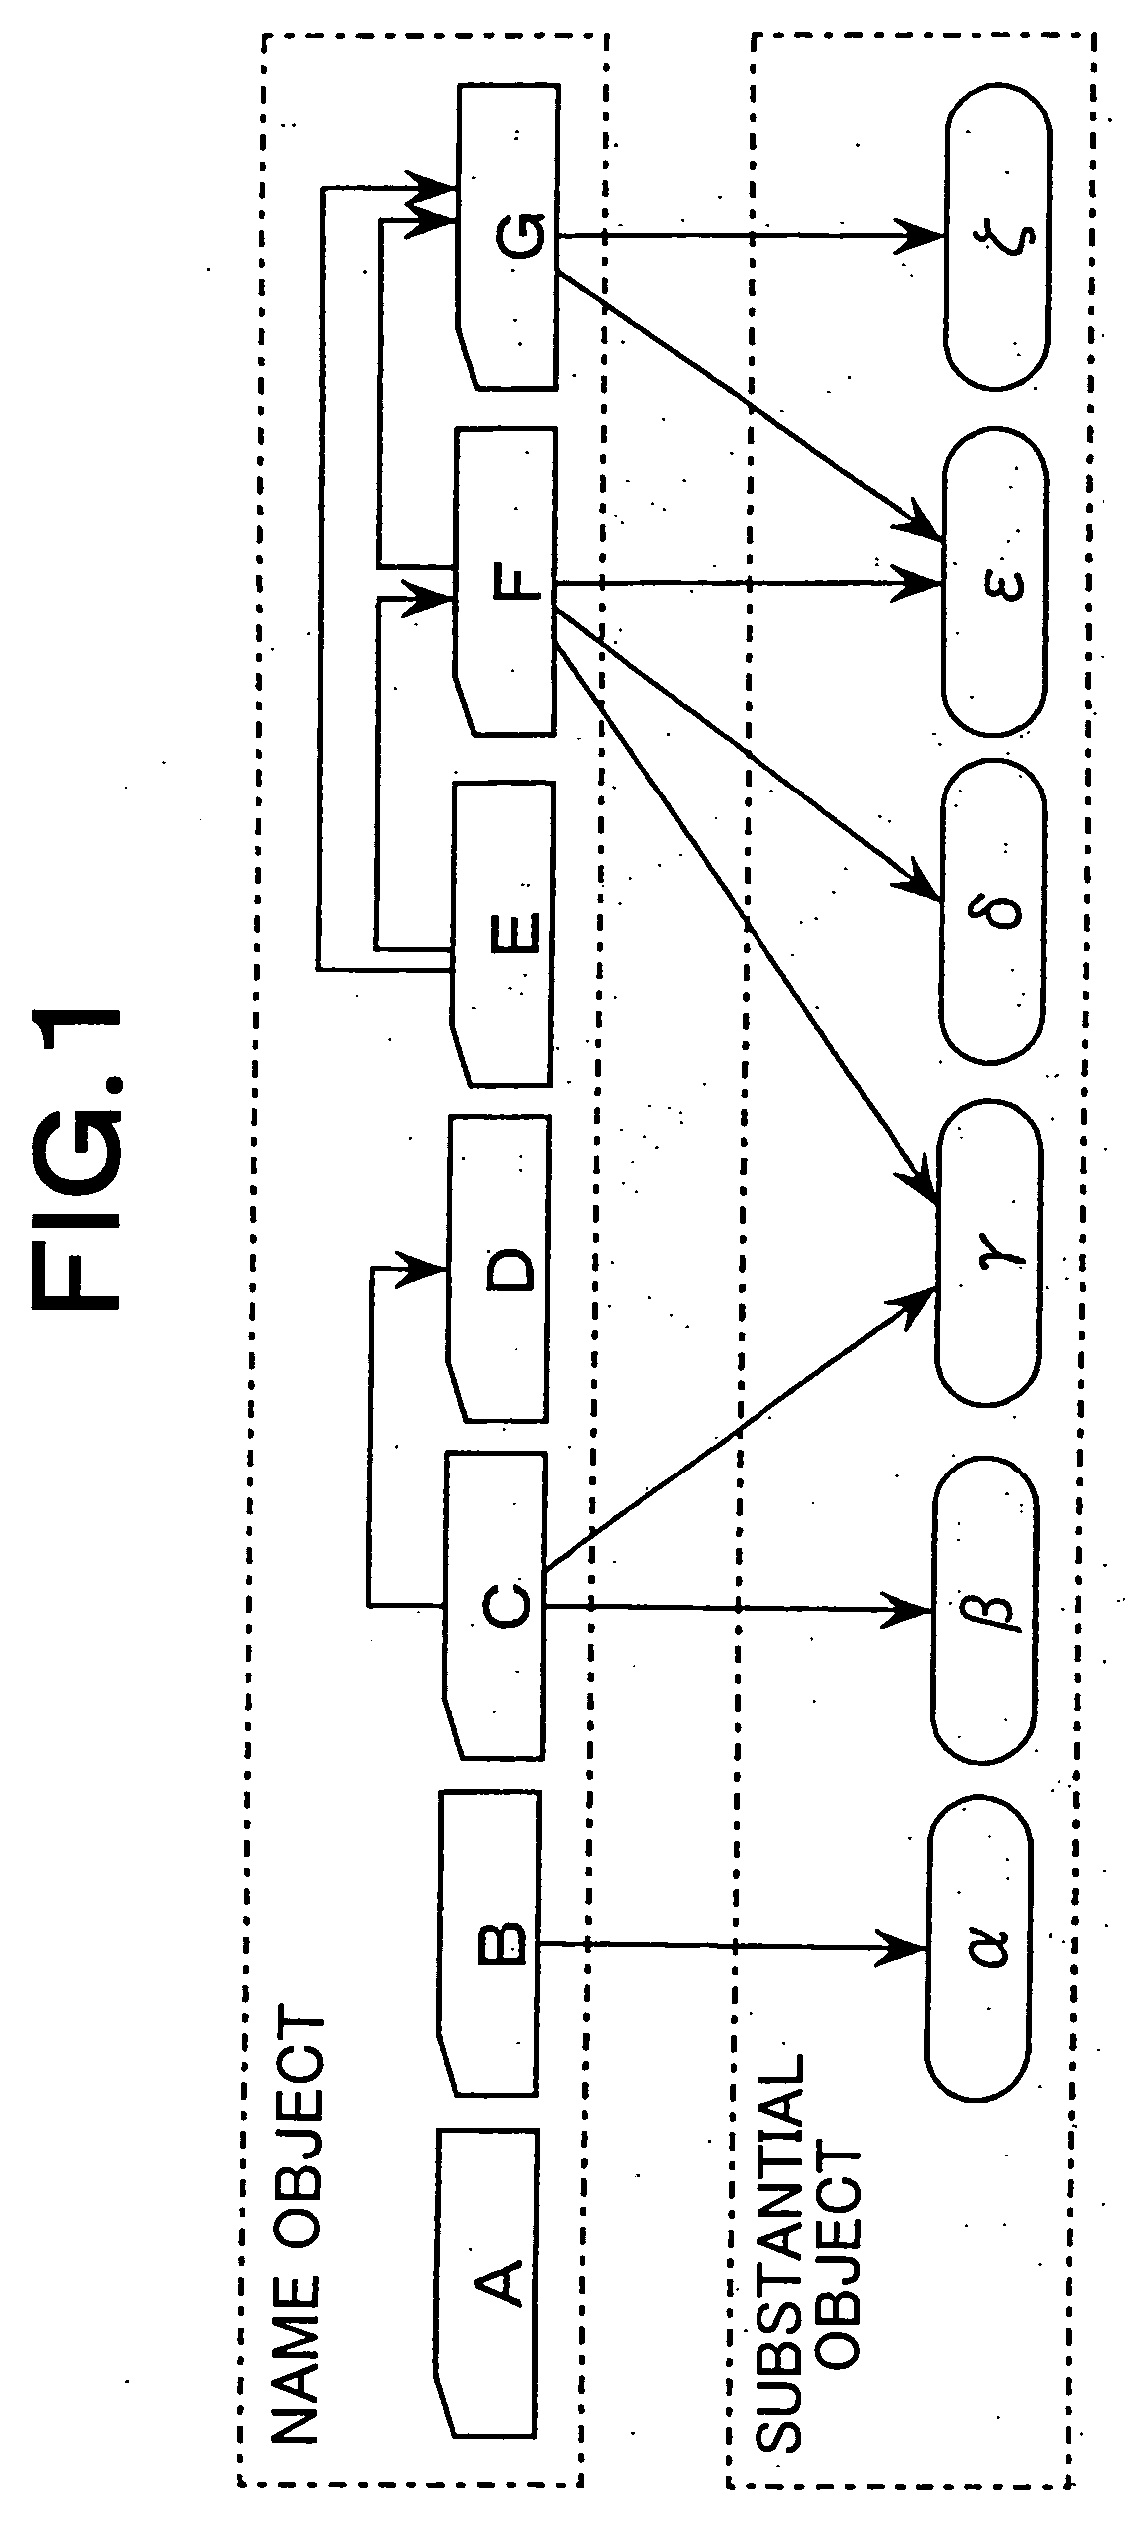 Access control system, access control method, and access control program